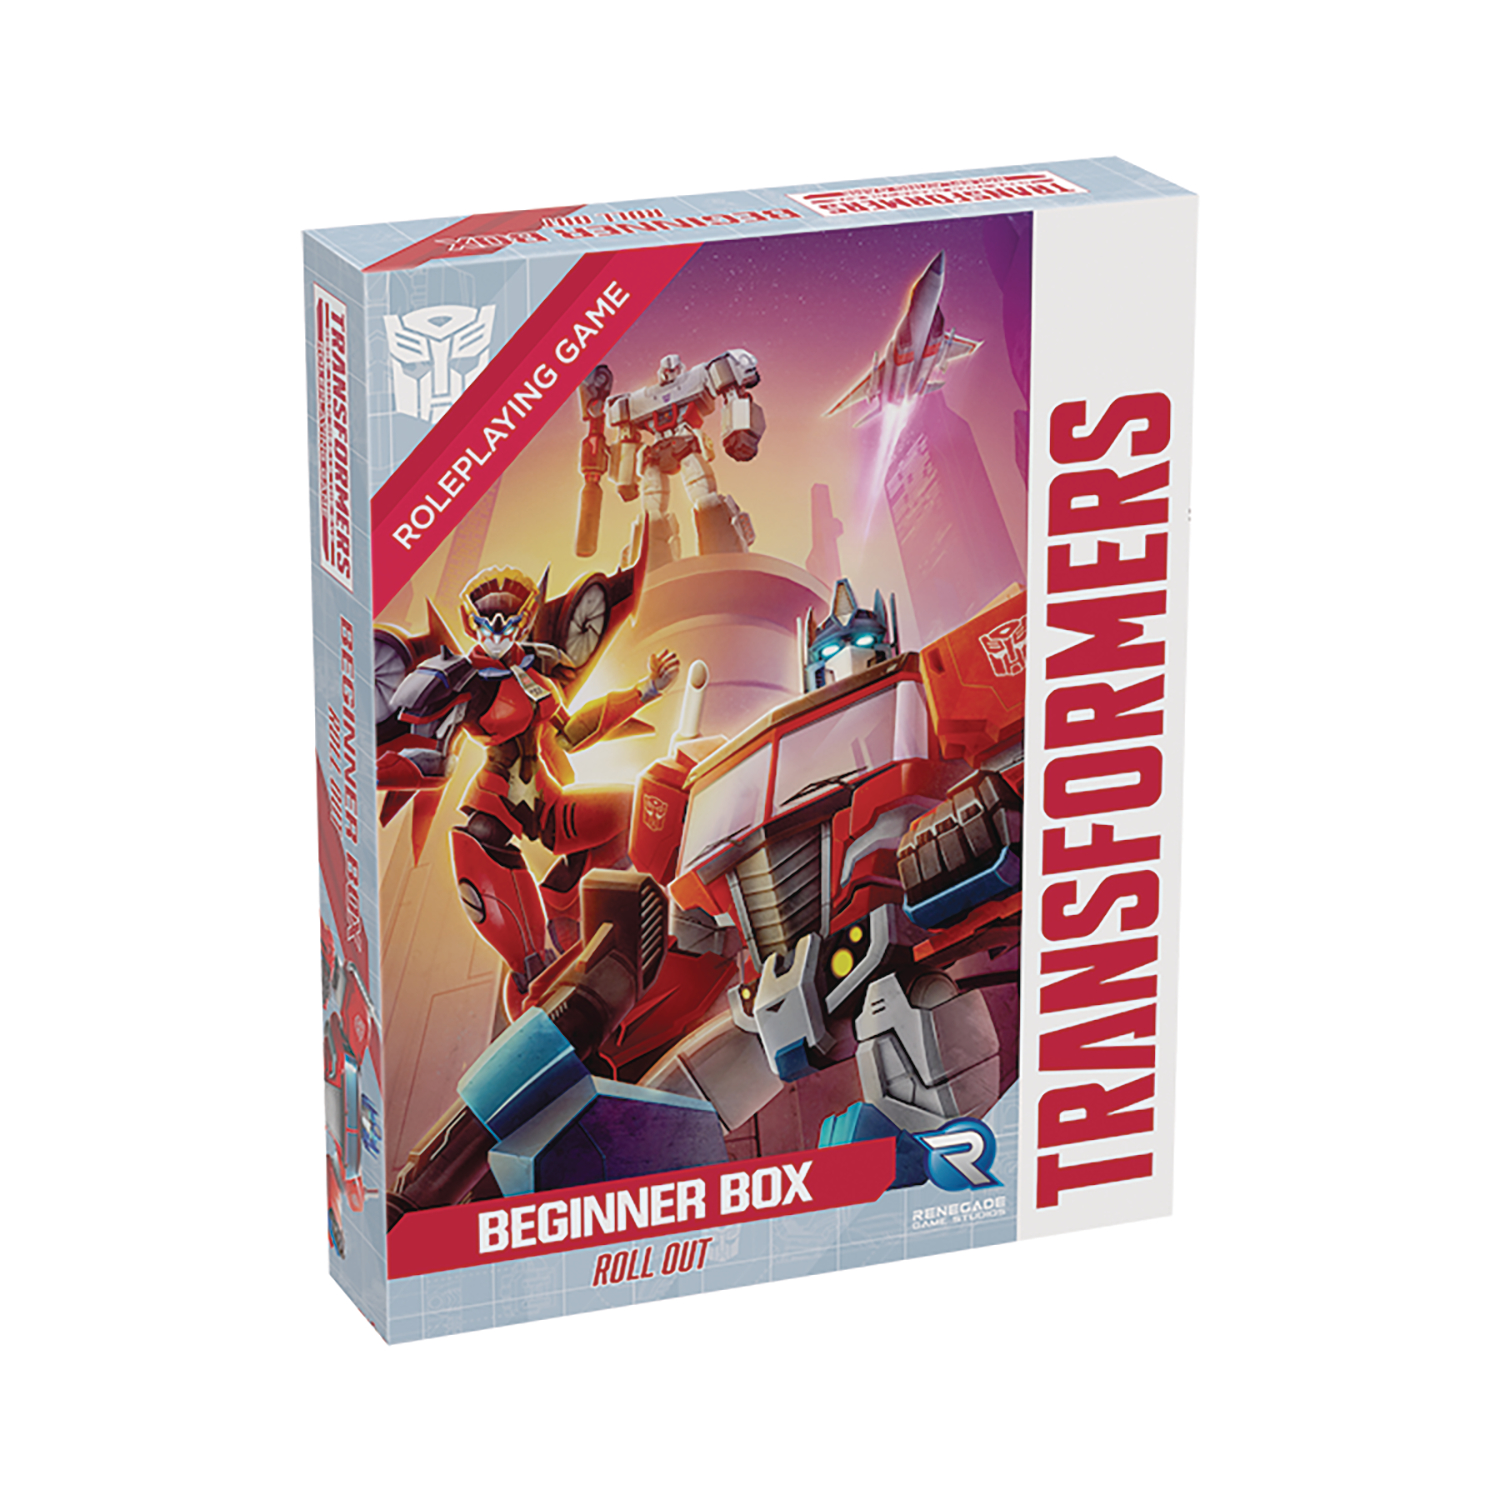 Transformers RPG Beginner Box Roll Out